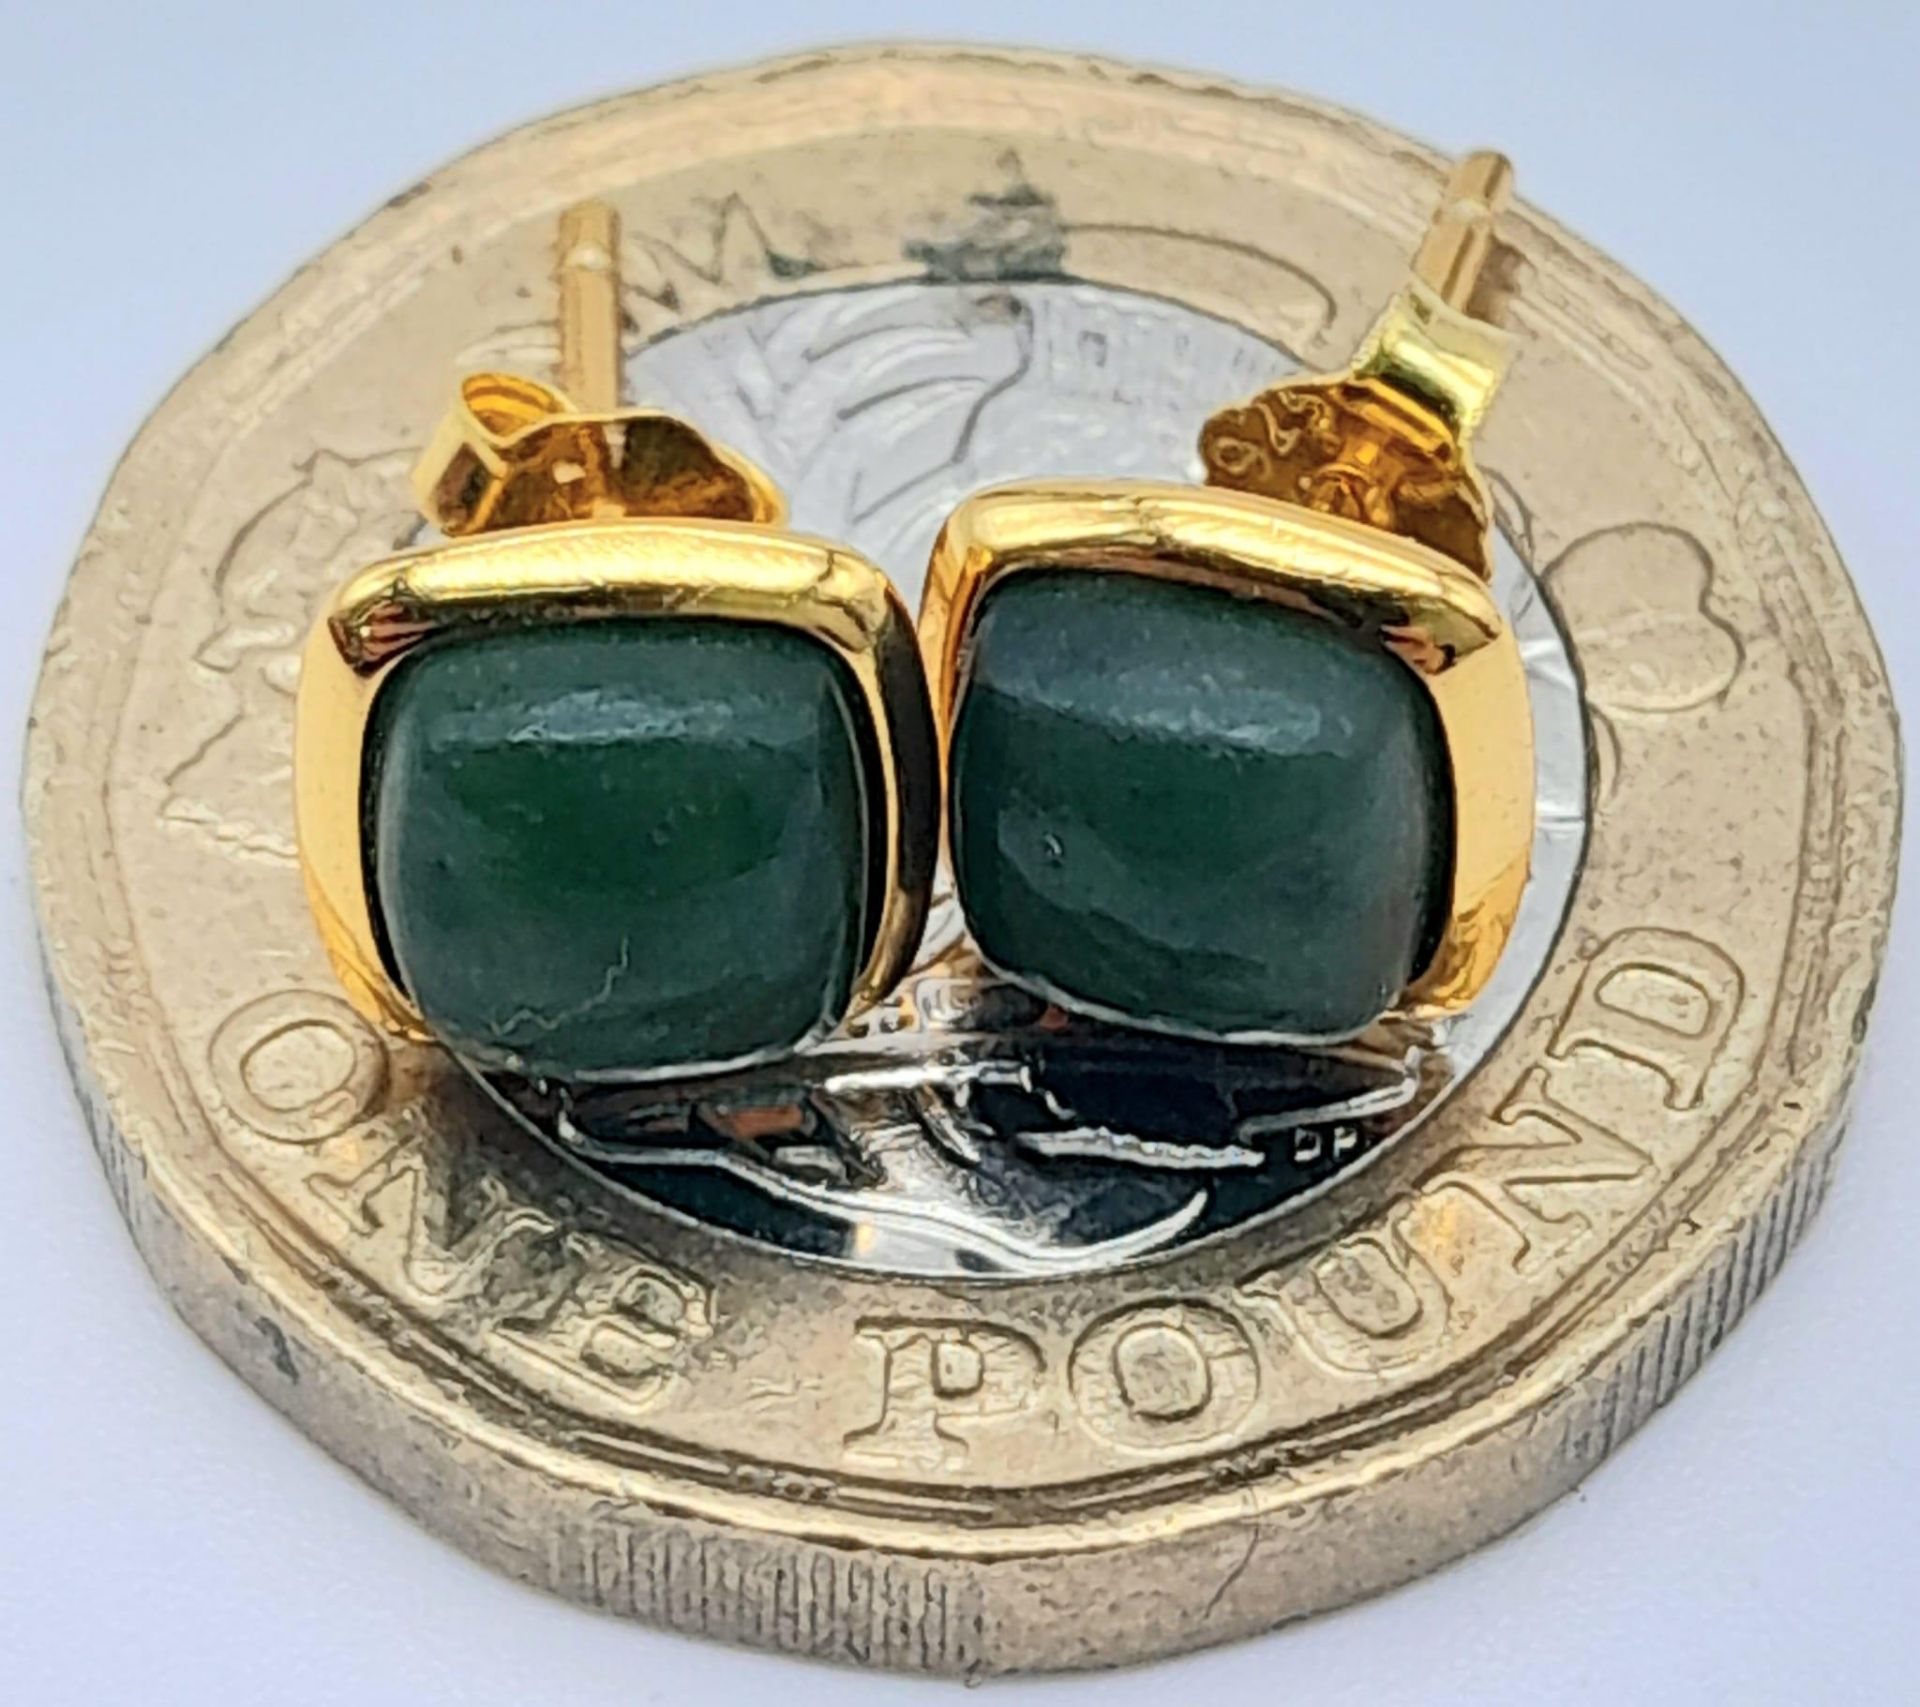 Delightful pair of Yellow Gold Gilded, Sterling Silver Jade Stud Earrings. Measures 0.5cm wide. - Image 3 of 4